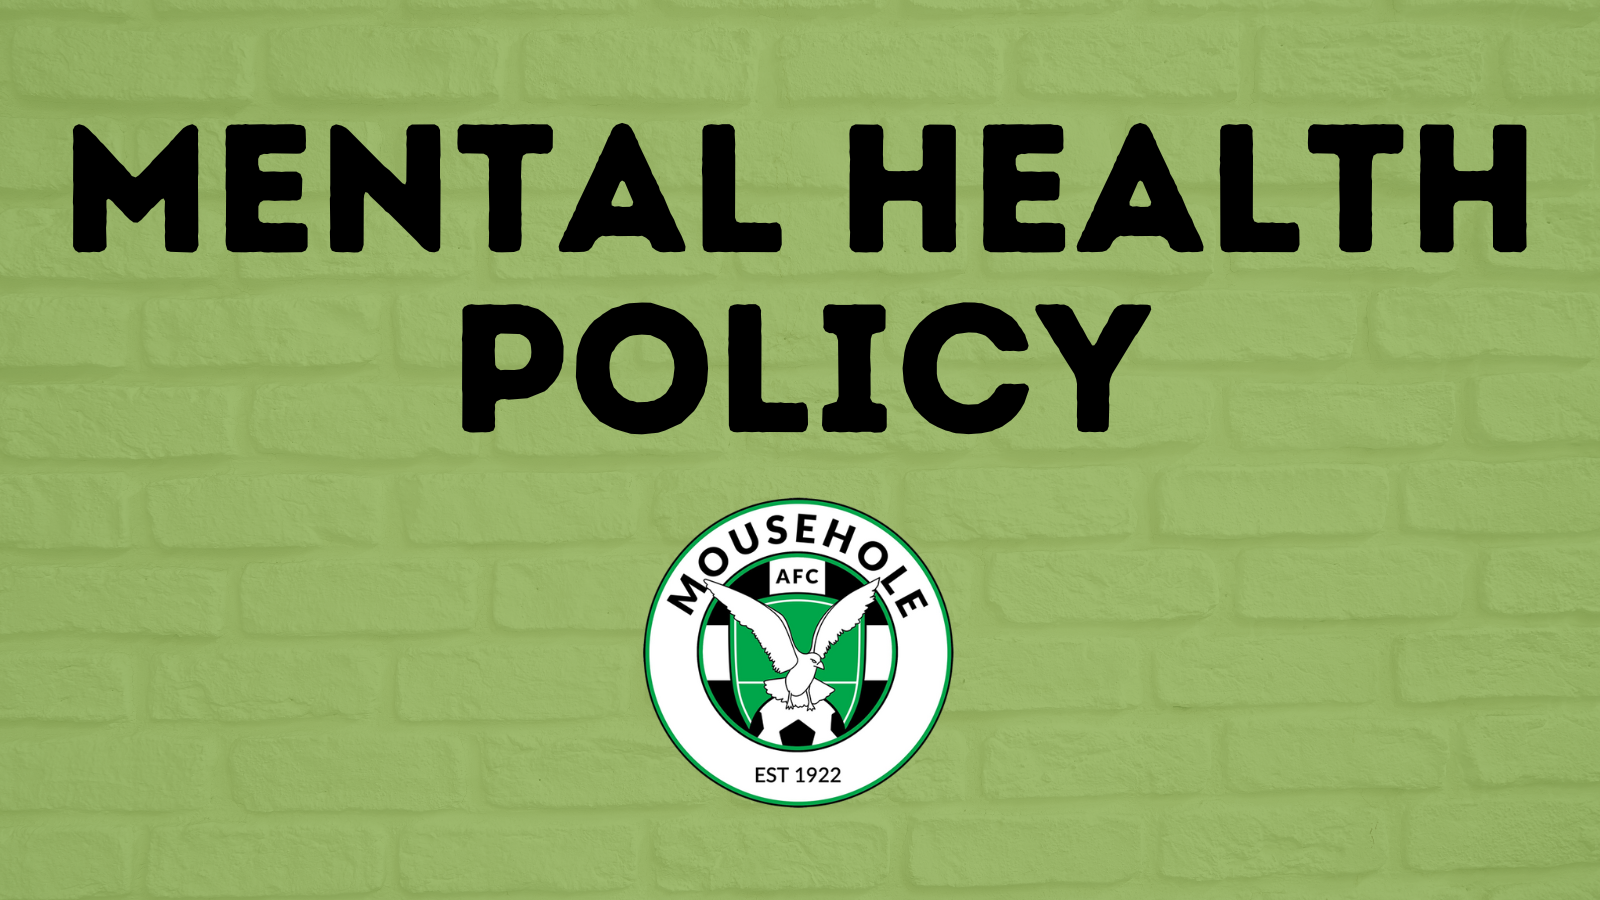 Mental Health Policy Mousehole AFC